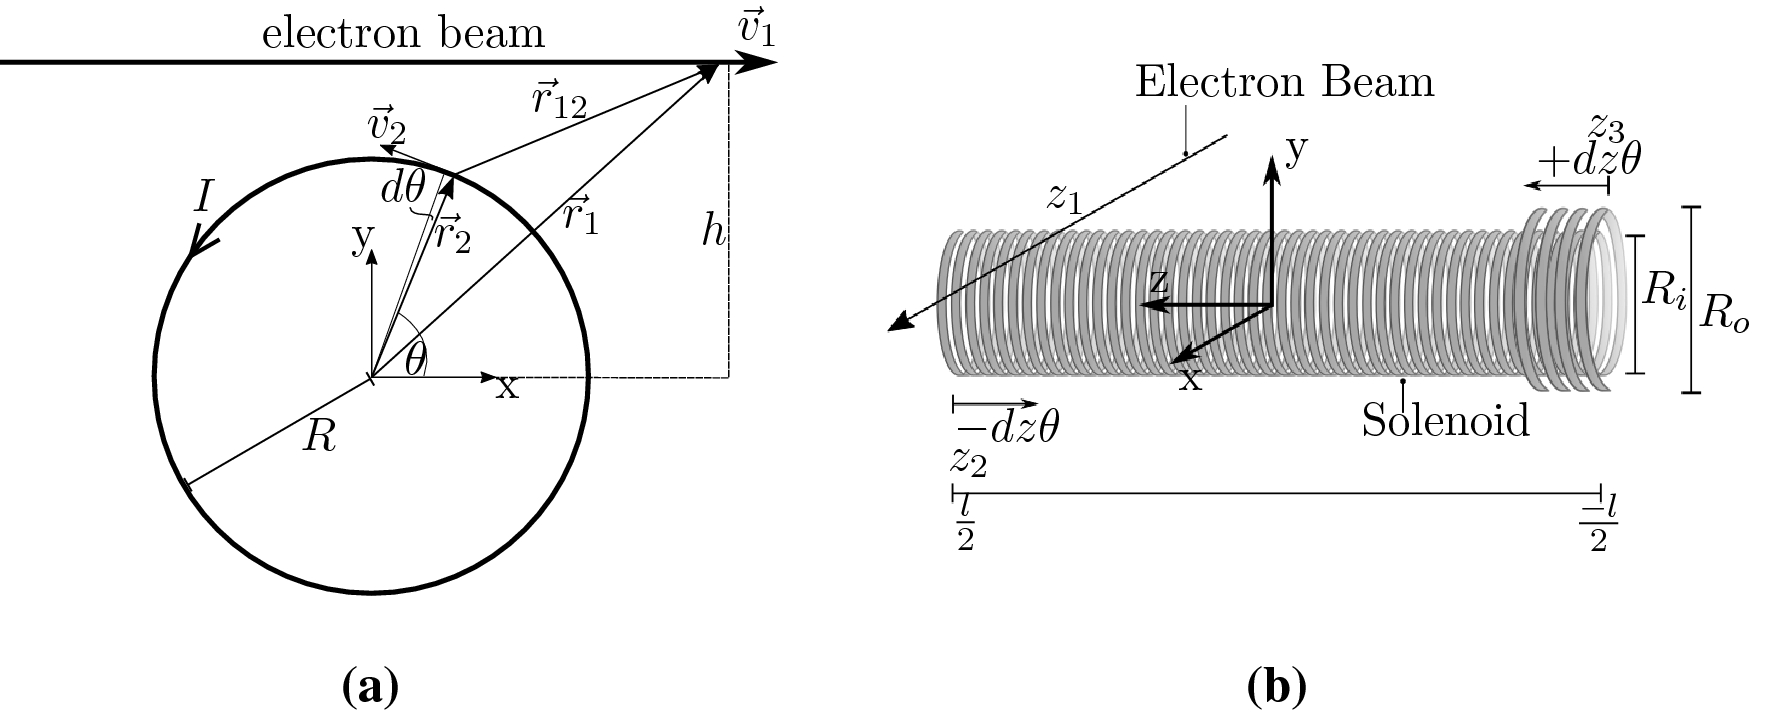 Right Hand Solenoid Rule: Direction of Solenoid's Magnetic Field 